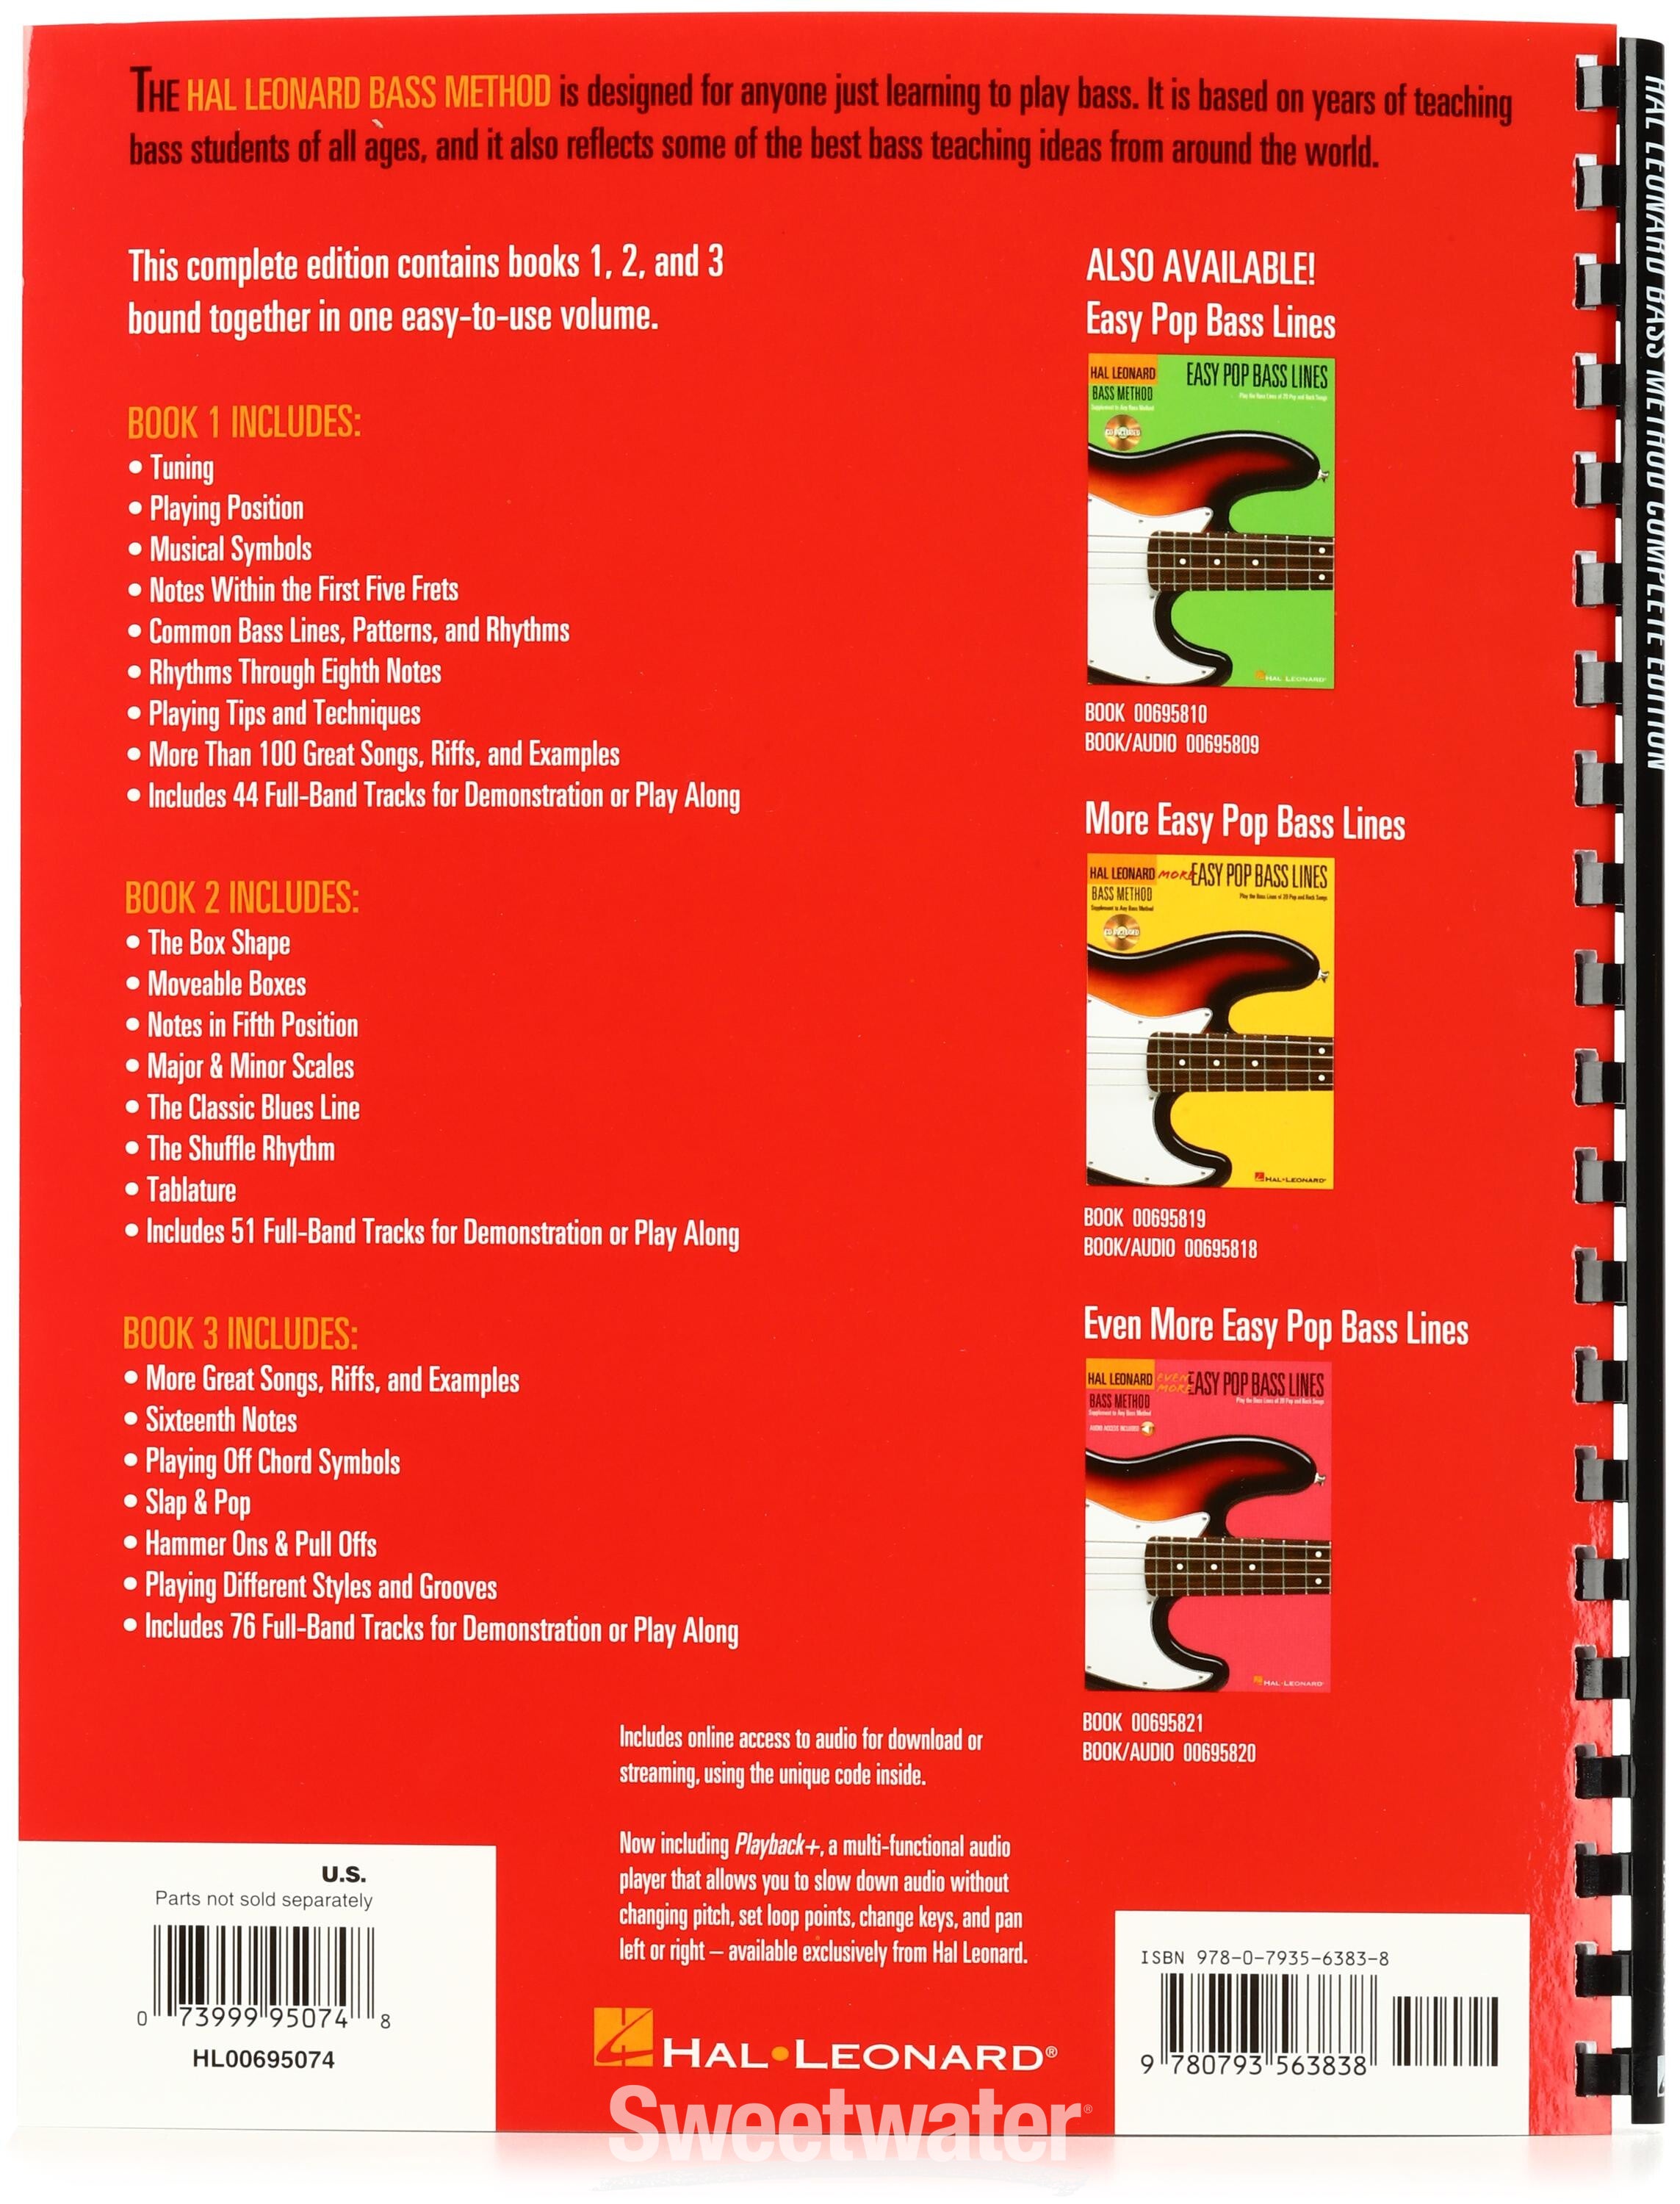 Hal Leonard Bass Method Complete Edition with Online Audio